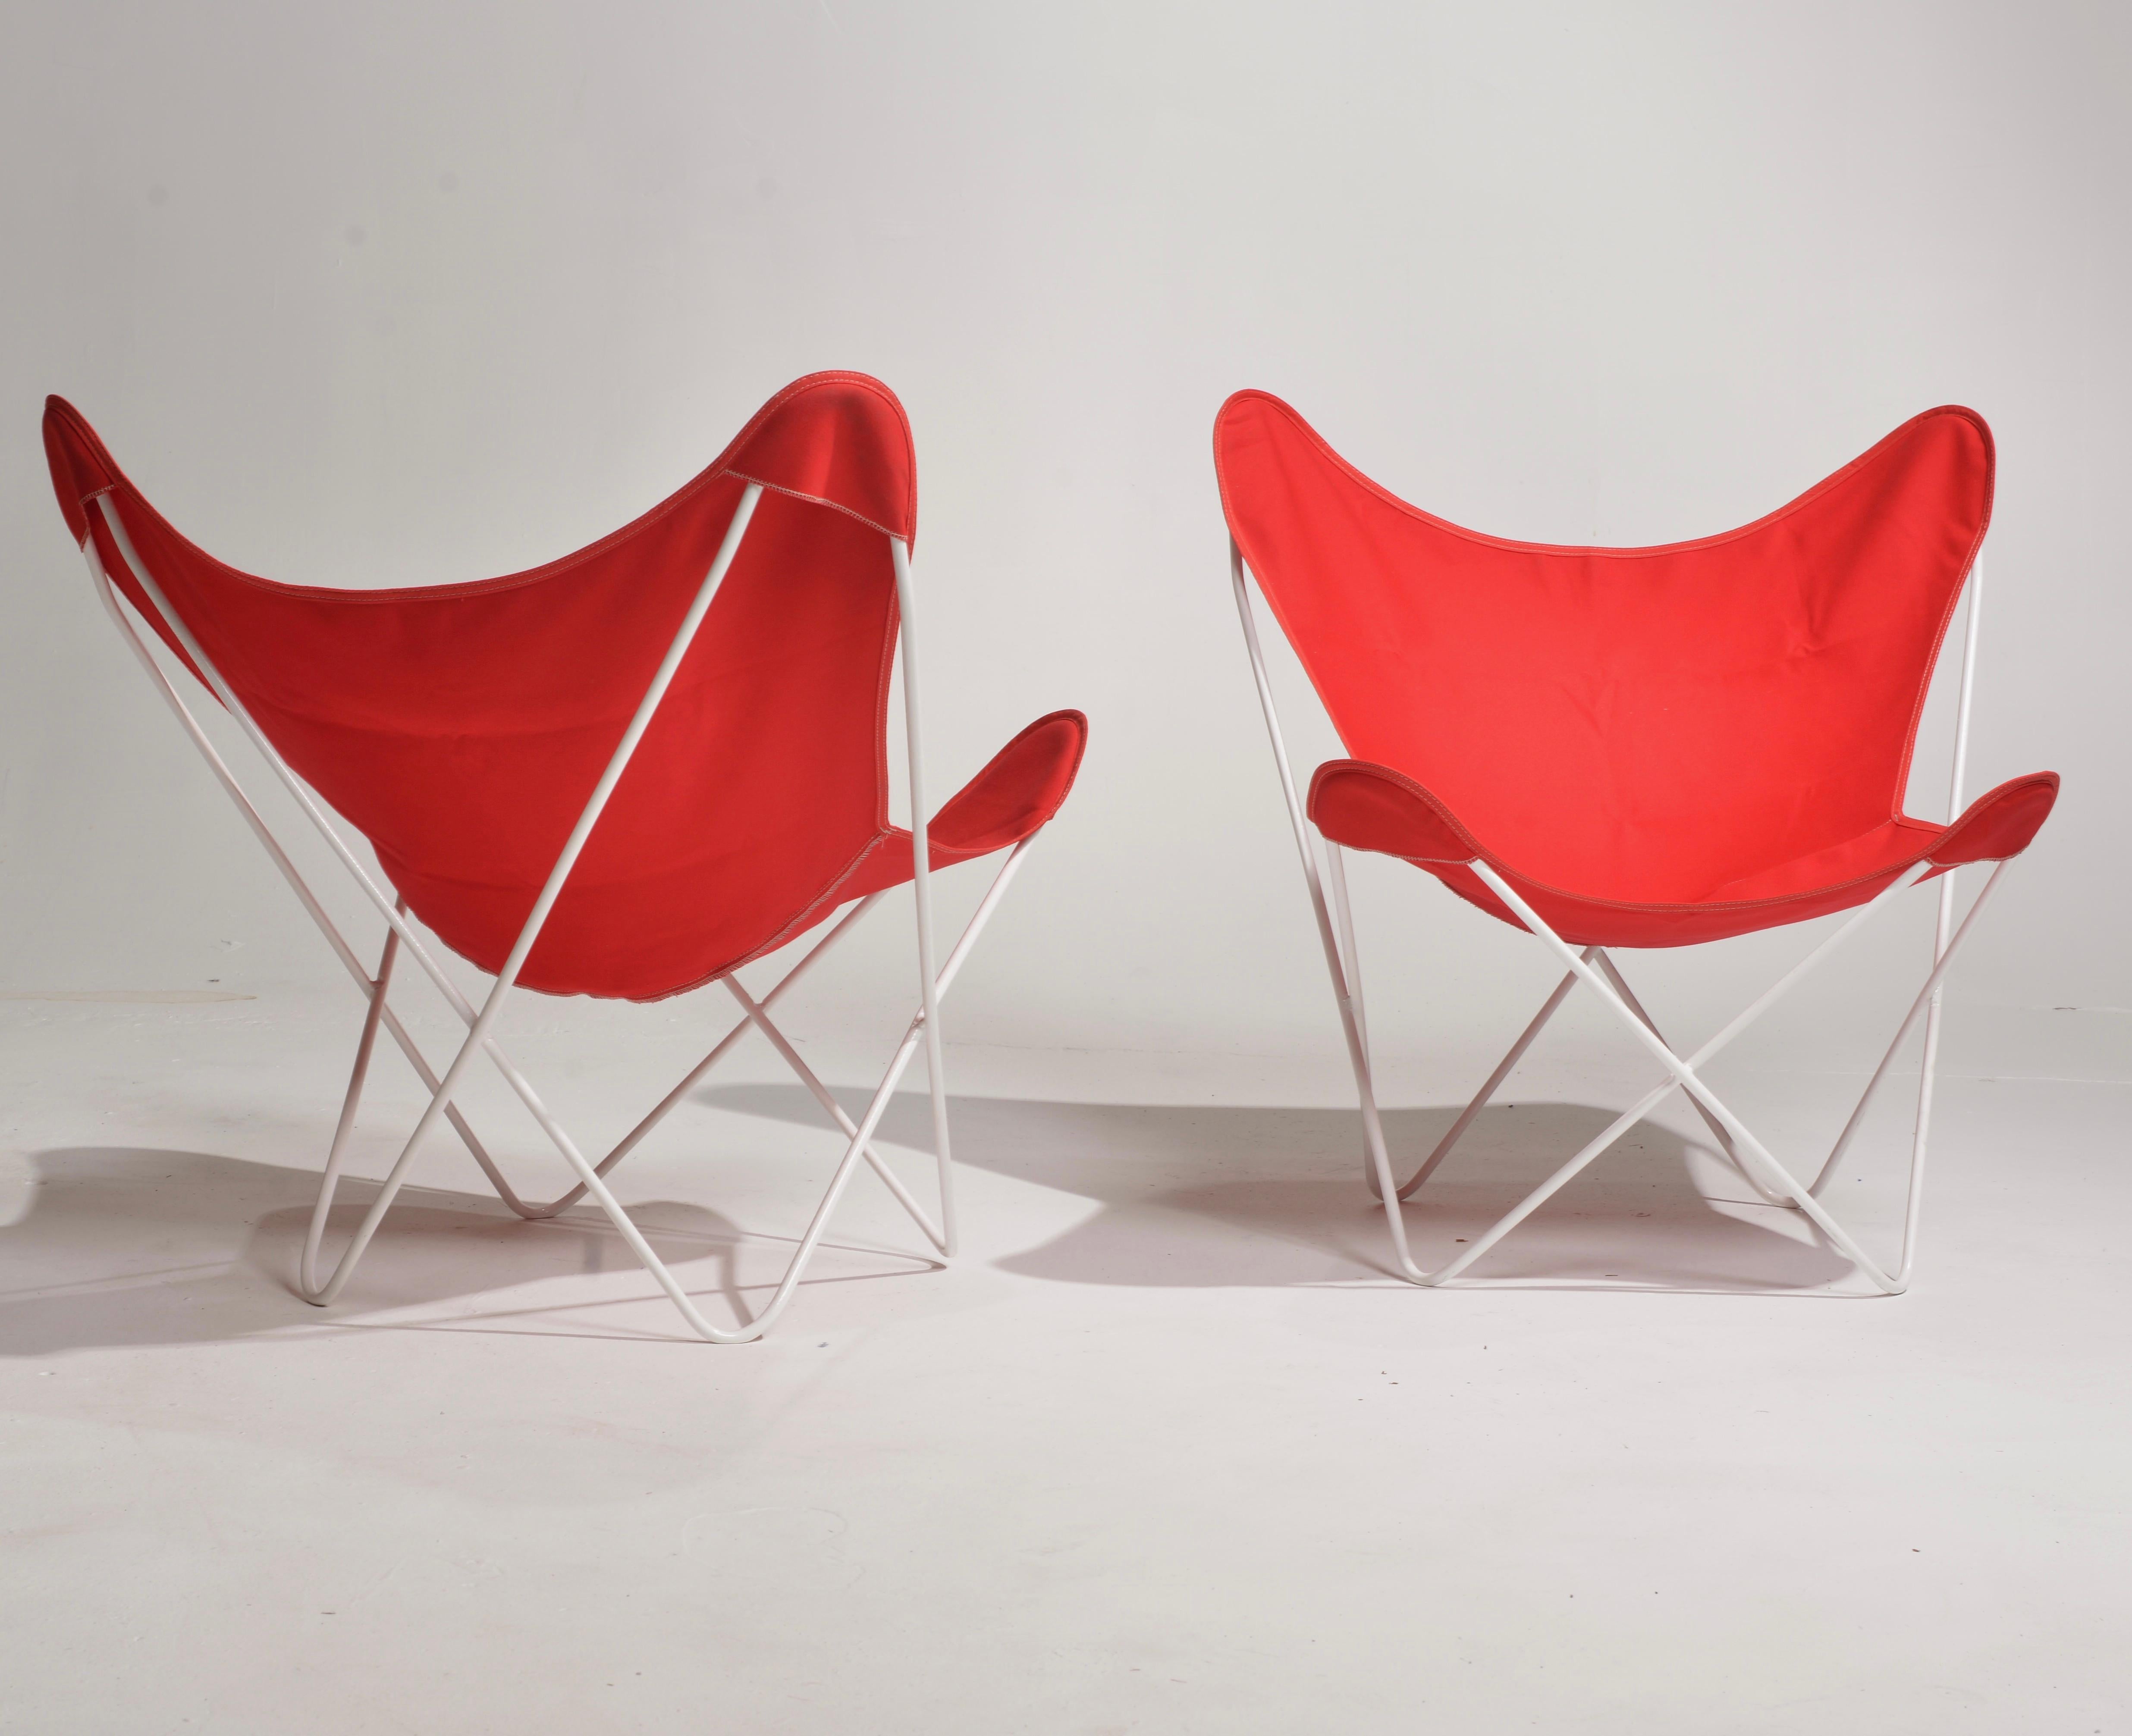 BKF Hardoy butterfly chairs for Knoll. New powder coat white finish, for indoor or outdoor use. New canvas slings. Priced per chair. 4 chairs in stock.